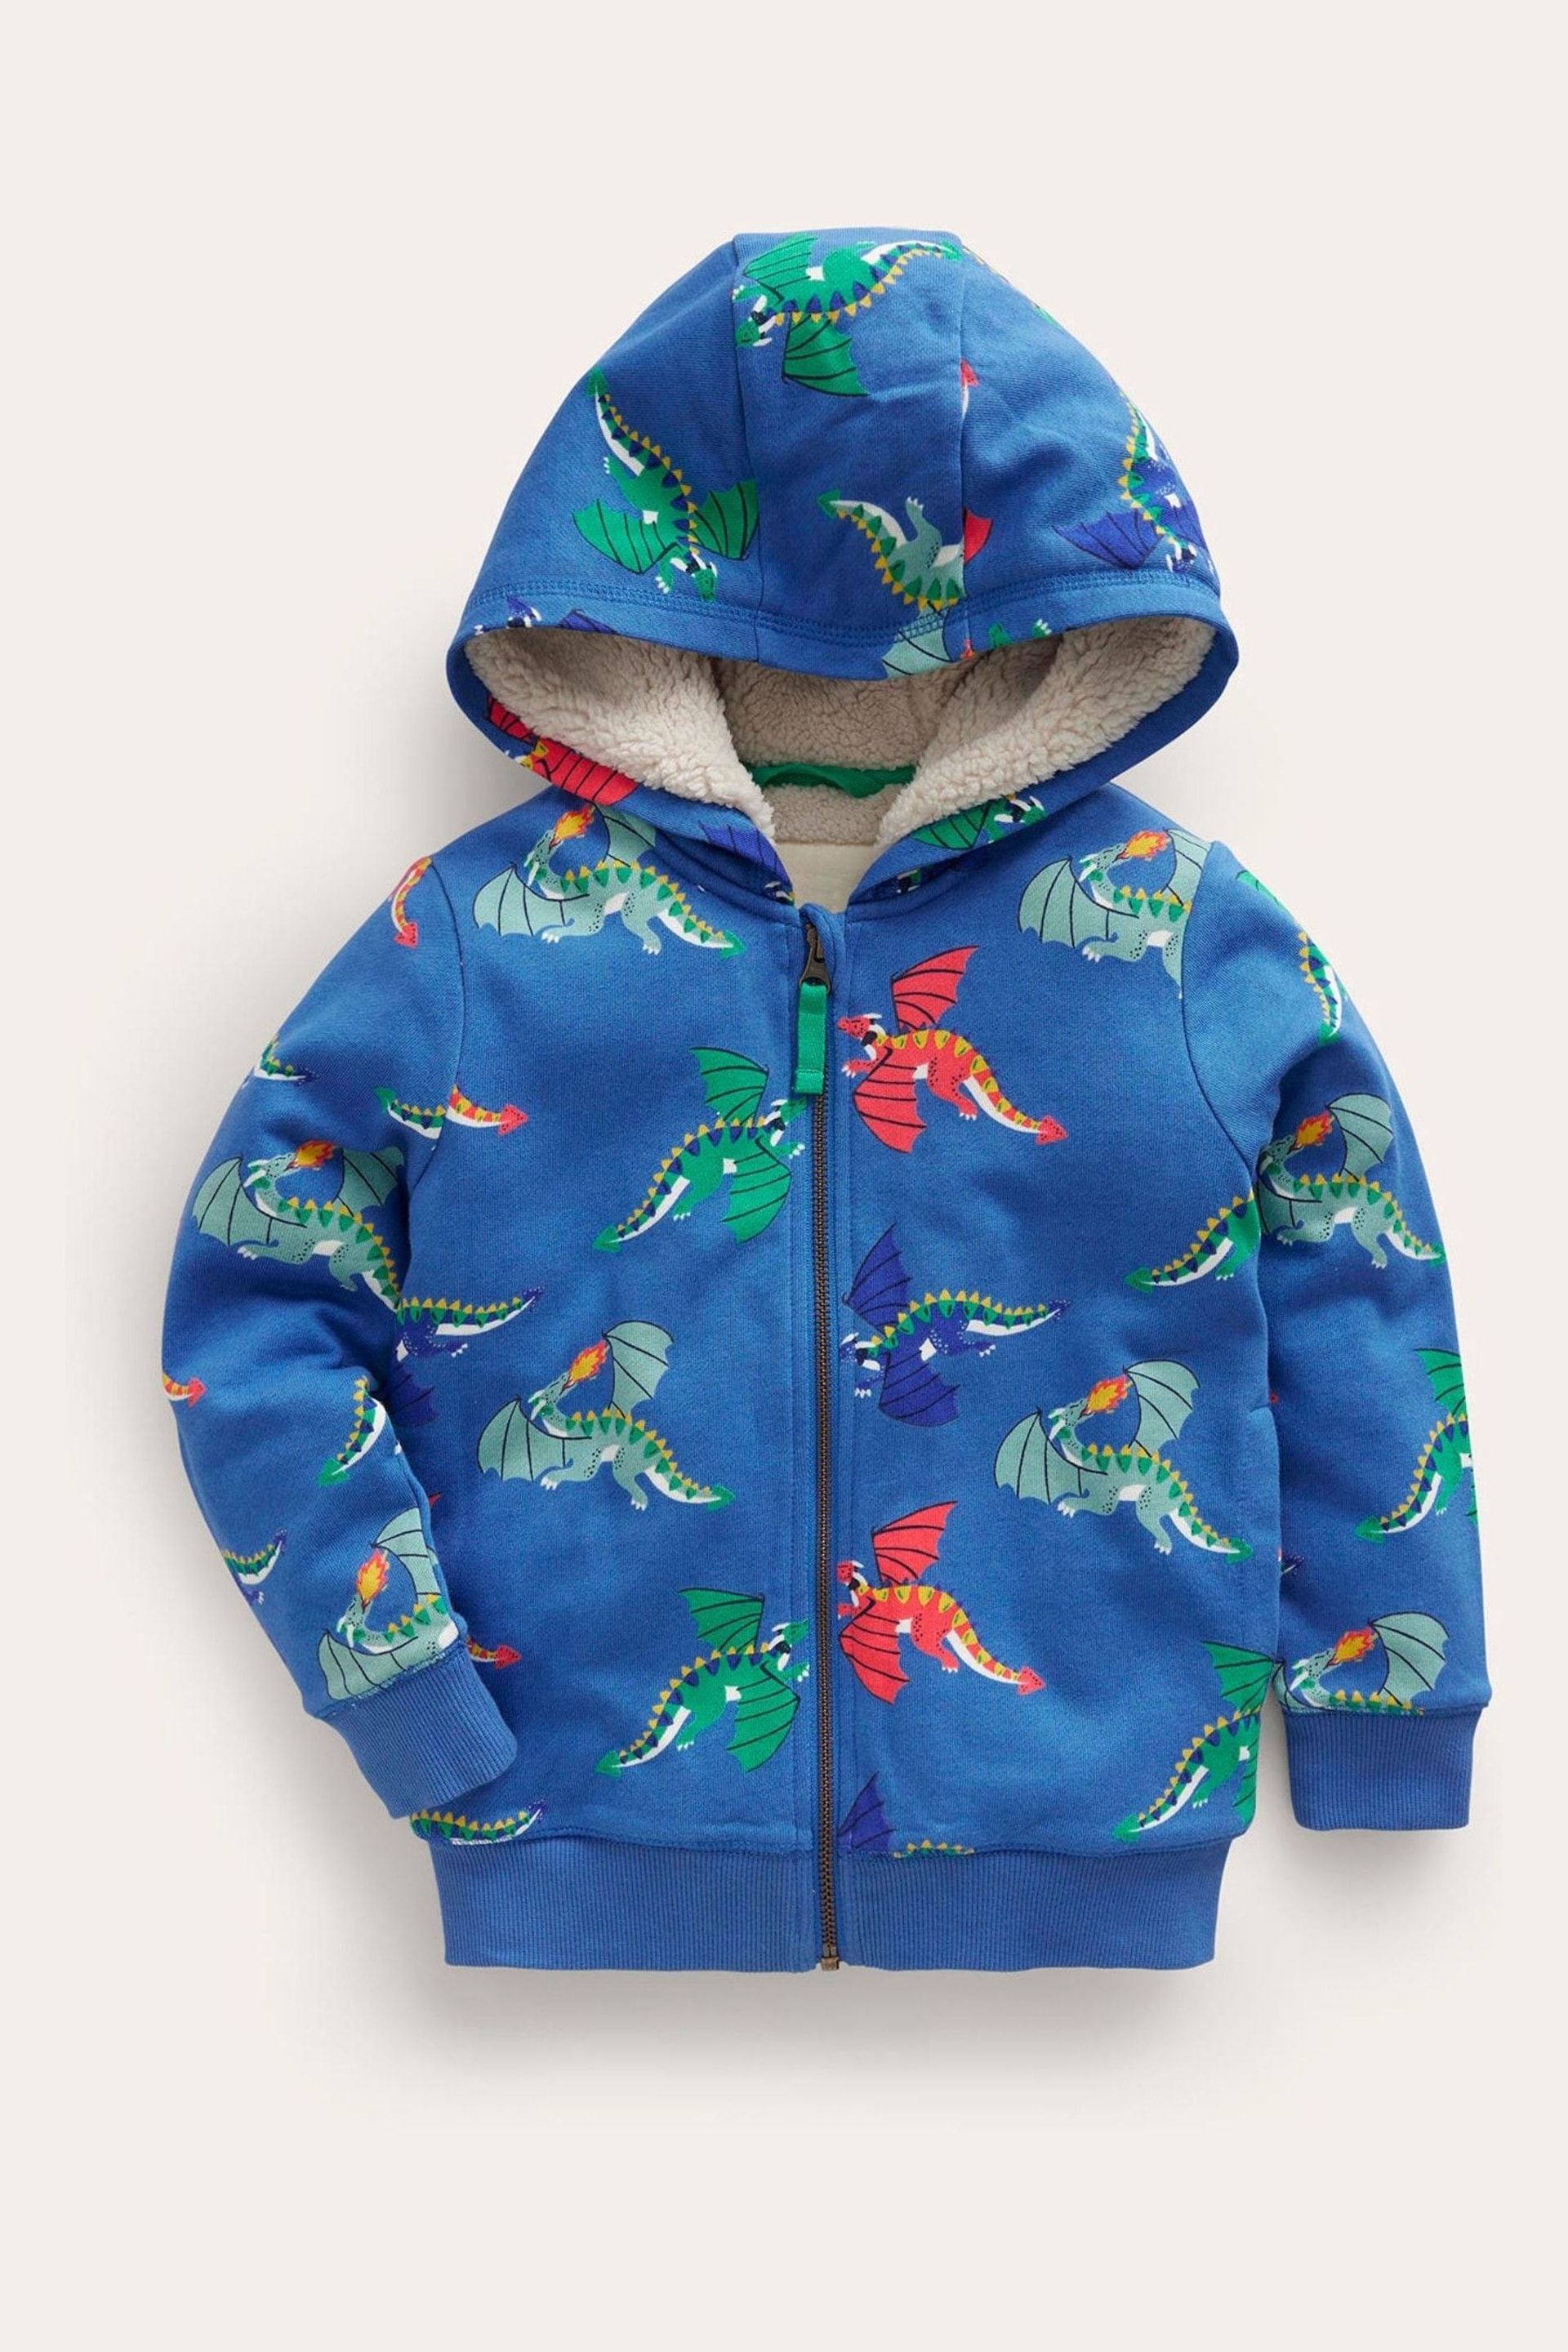 Boden Blue Shaggy-Lined Dragon Printed Hoodie - Image 2 of 4